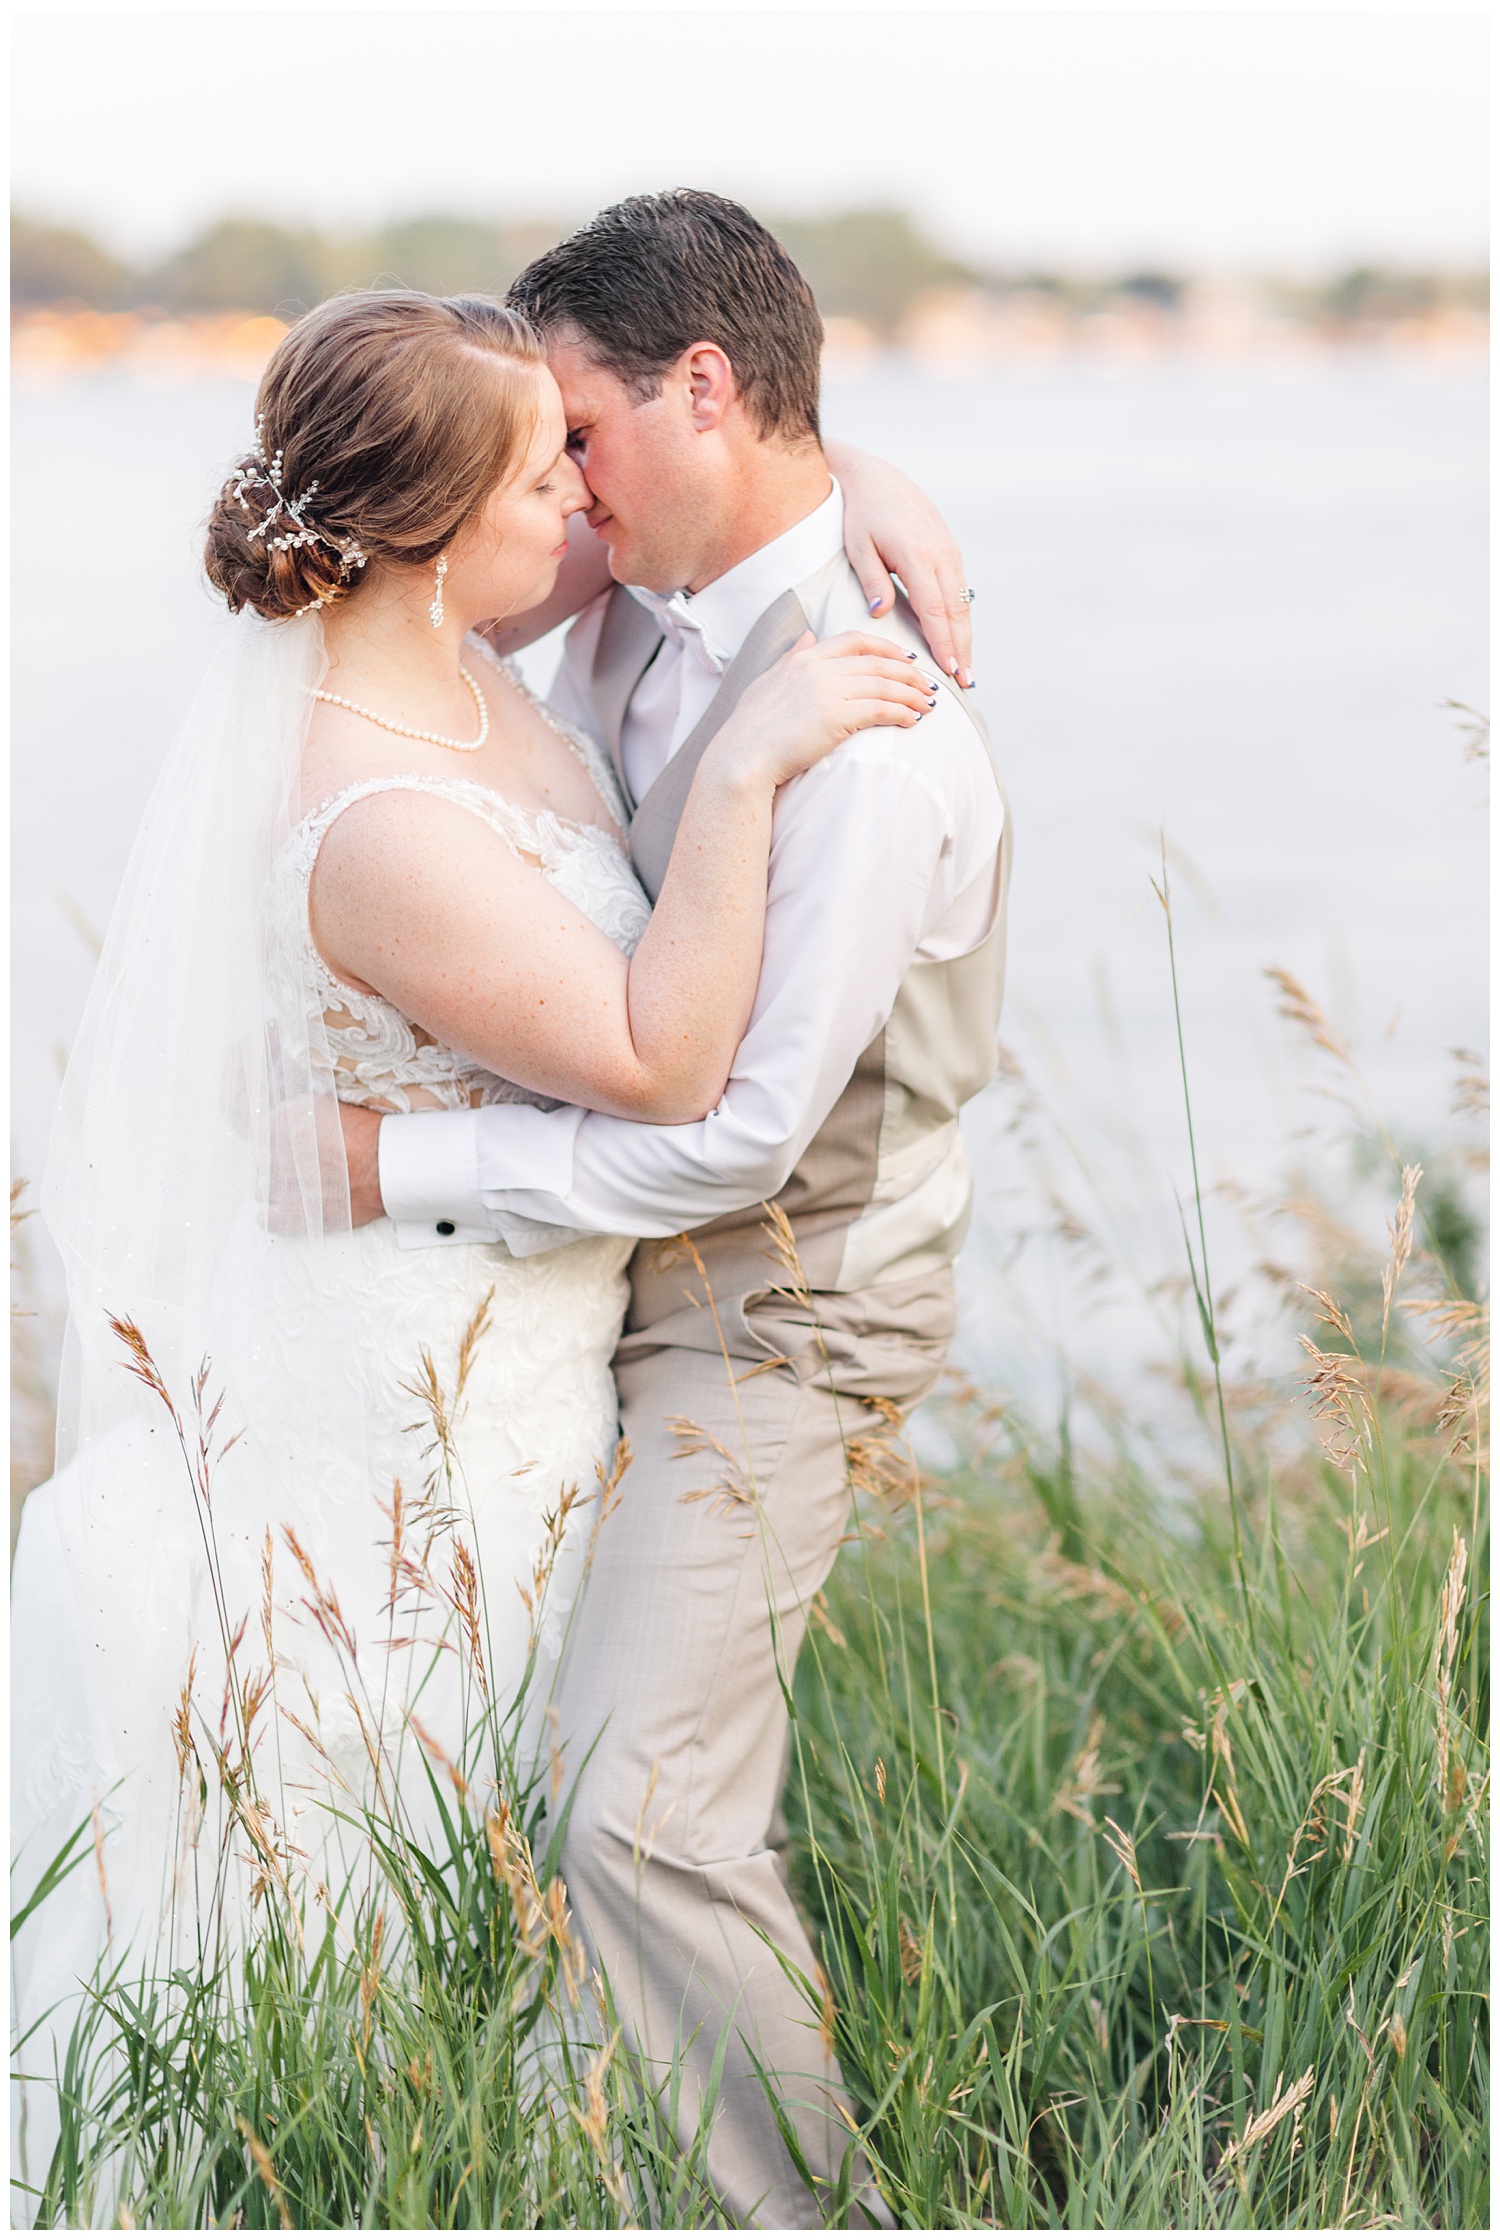 Chris and Hannah embrace in front of East Okoboji Lake on their wedding day | CB Studio